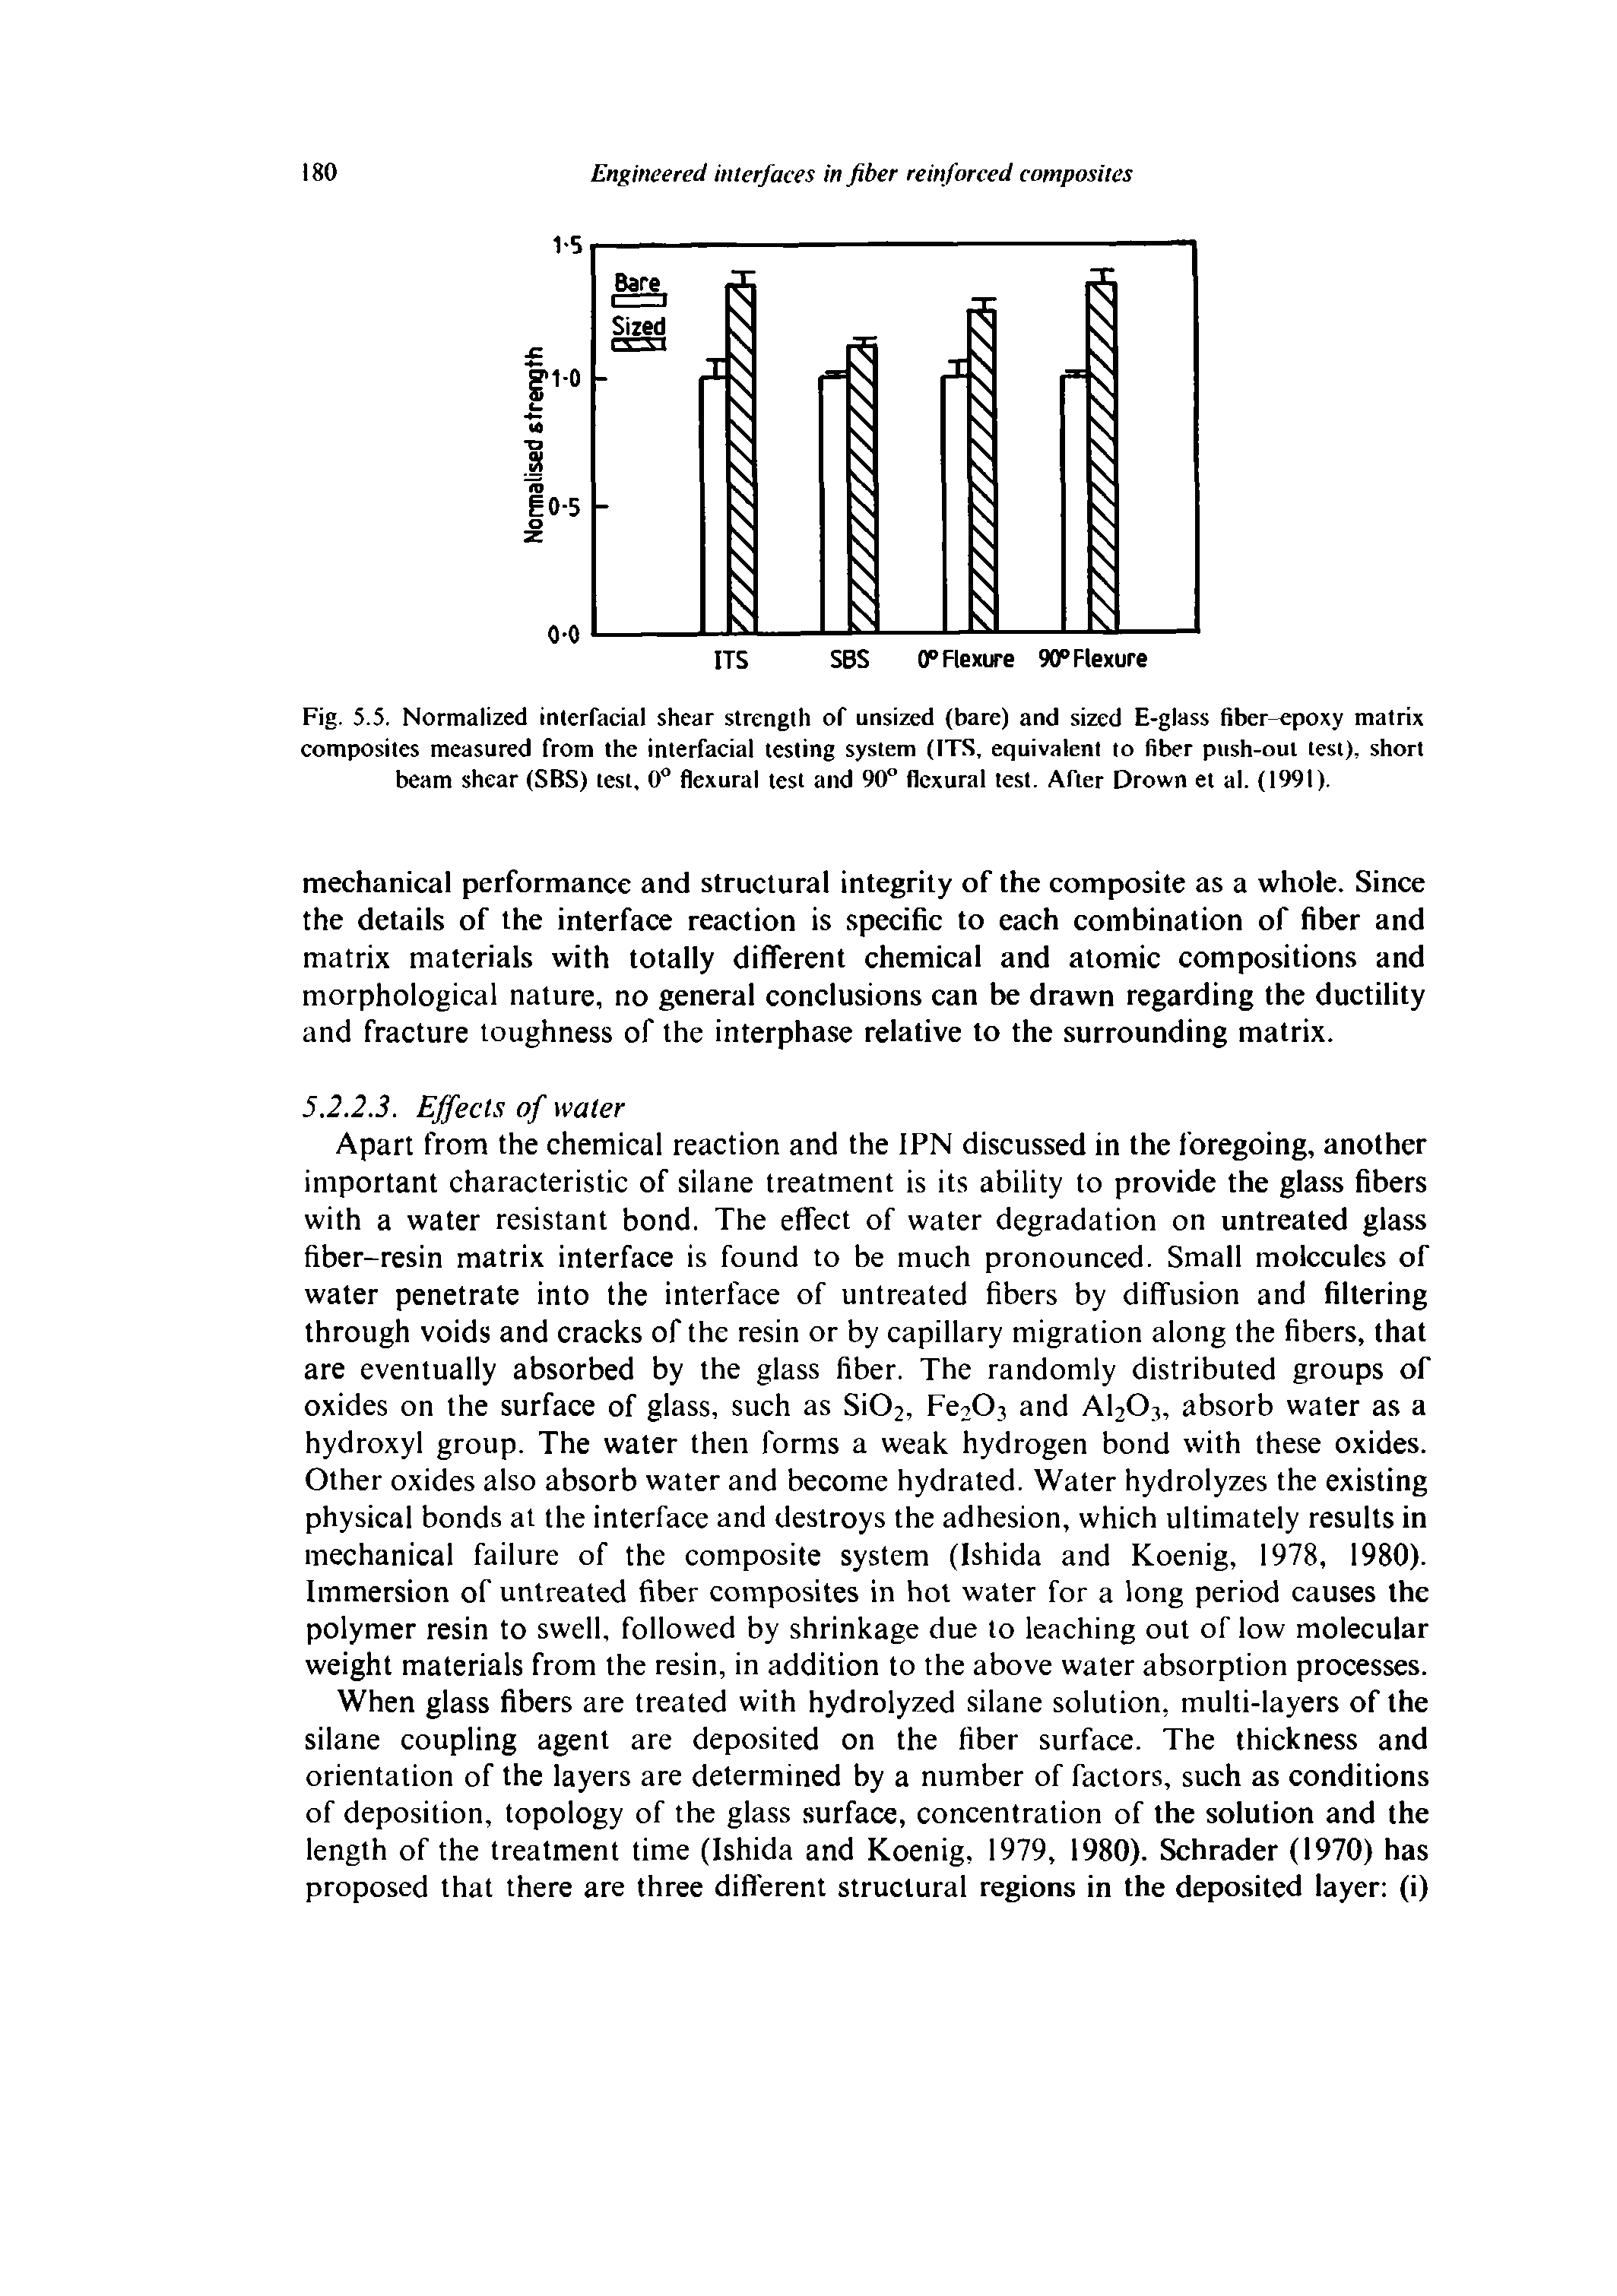 Fig. 5.5. Normalized irKerfacial shear strength of unsized (bare) and sized E-glass fiber-epoxy matrix eomposites measured from the interfaeial testing system (ITS, equivalent to fiber push-out test), short beam shear (SBS) test, 0° flexural test and 90° flexural test. After Drown et al. (1991).